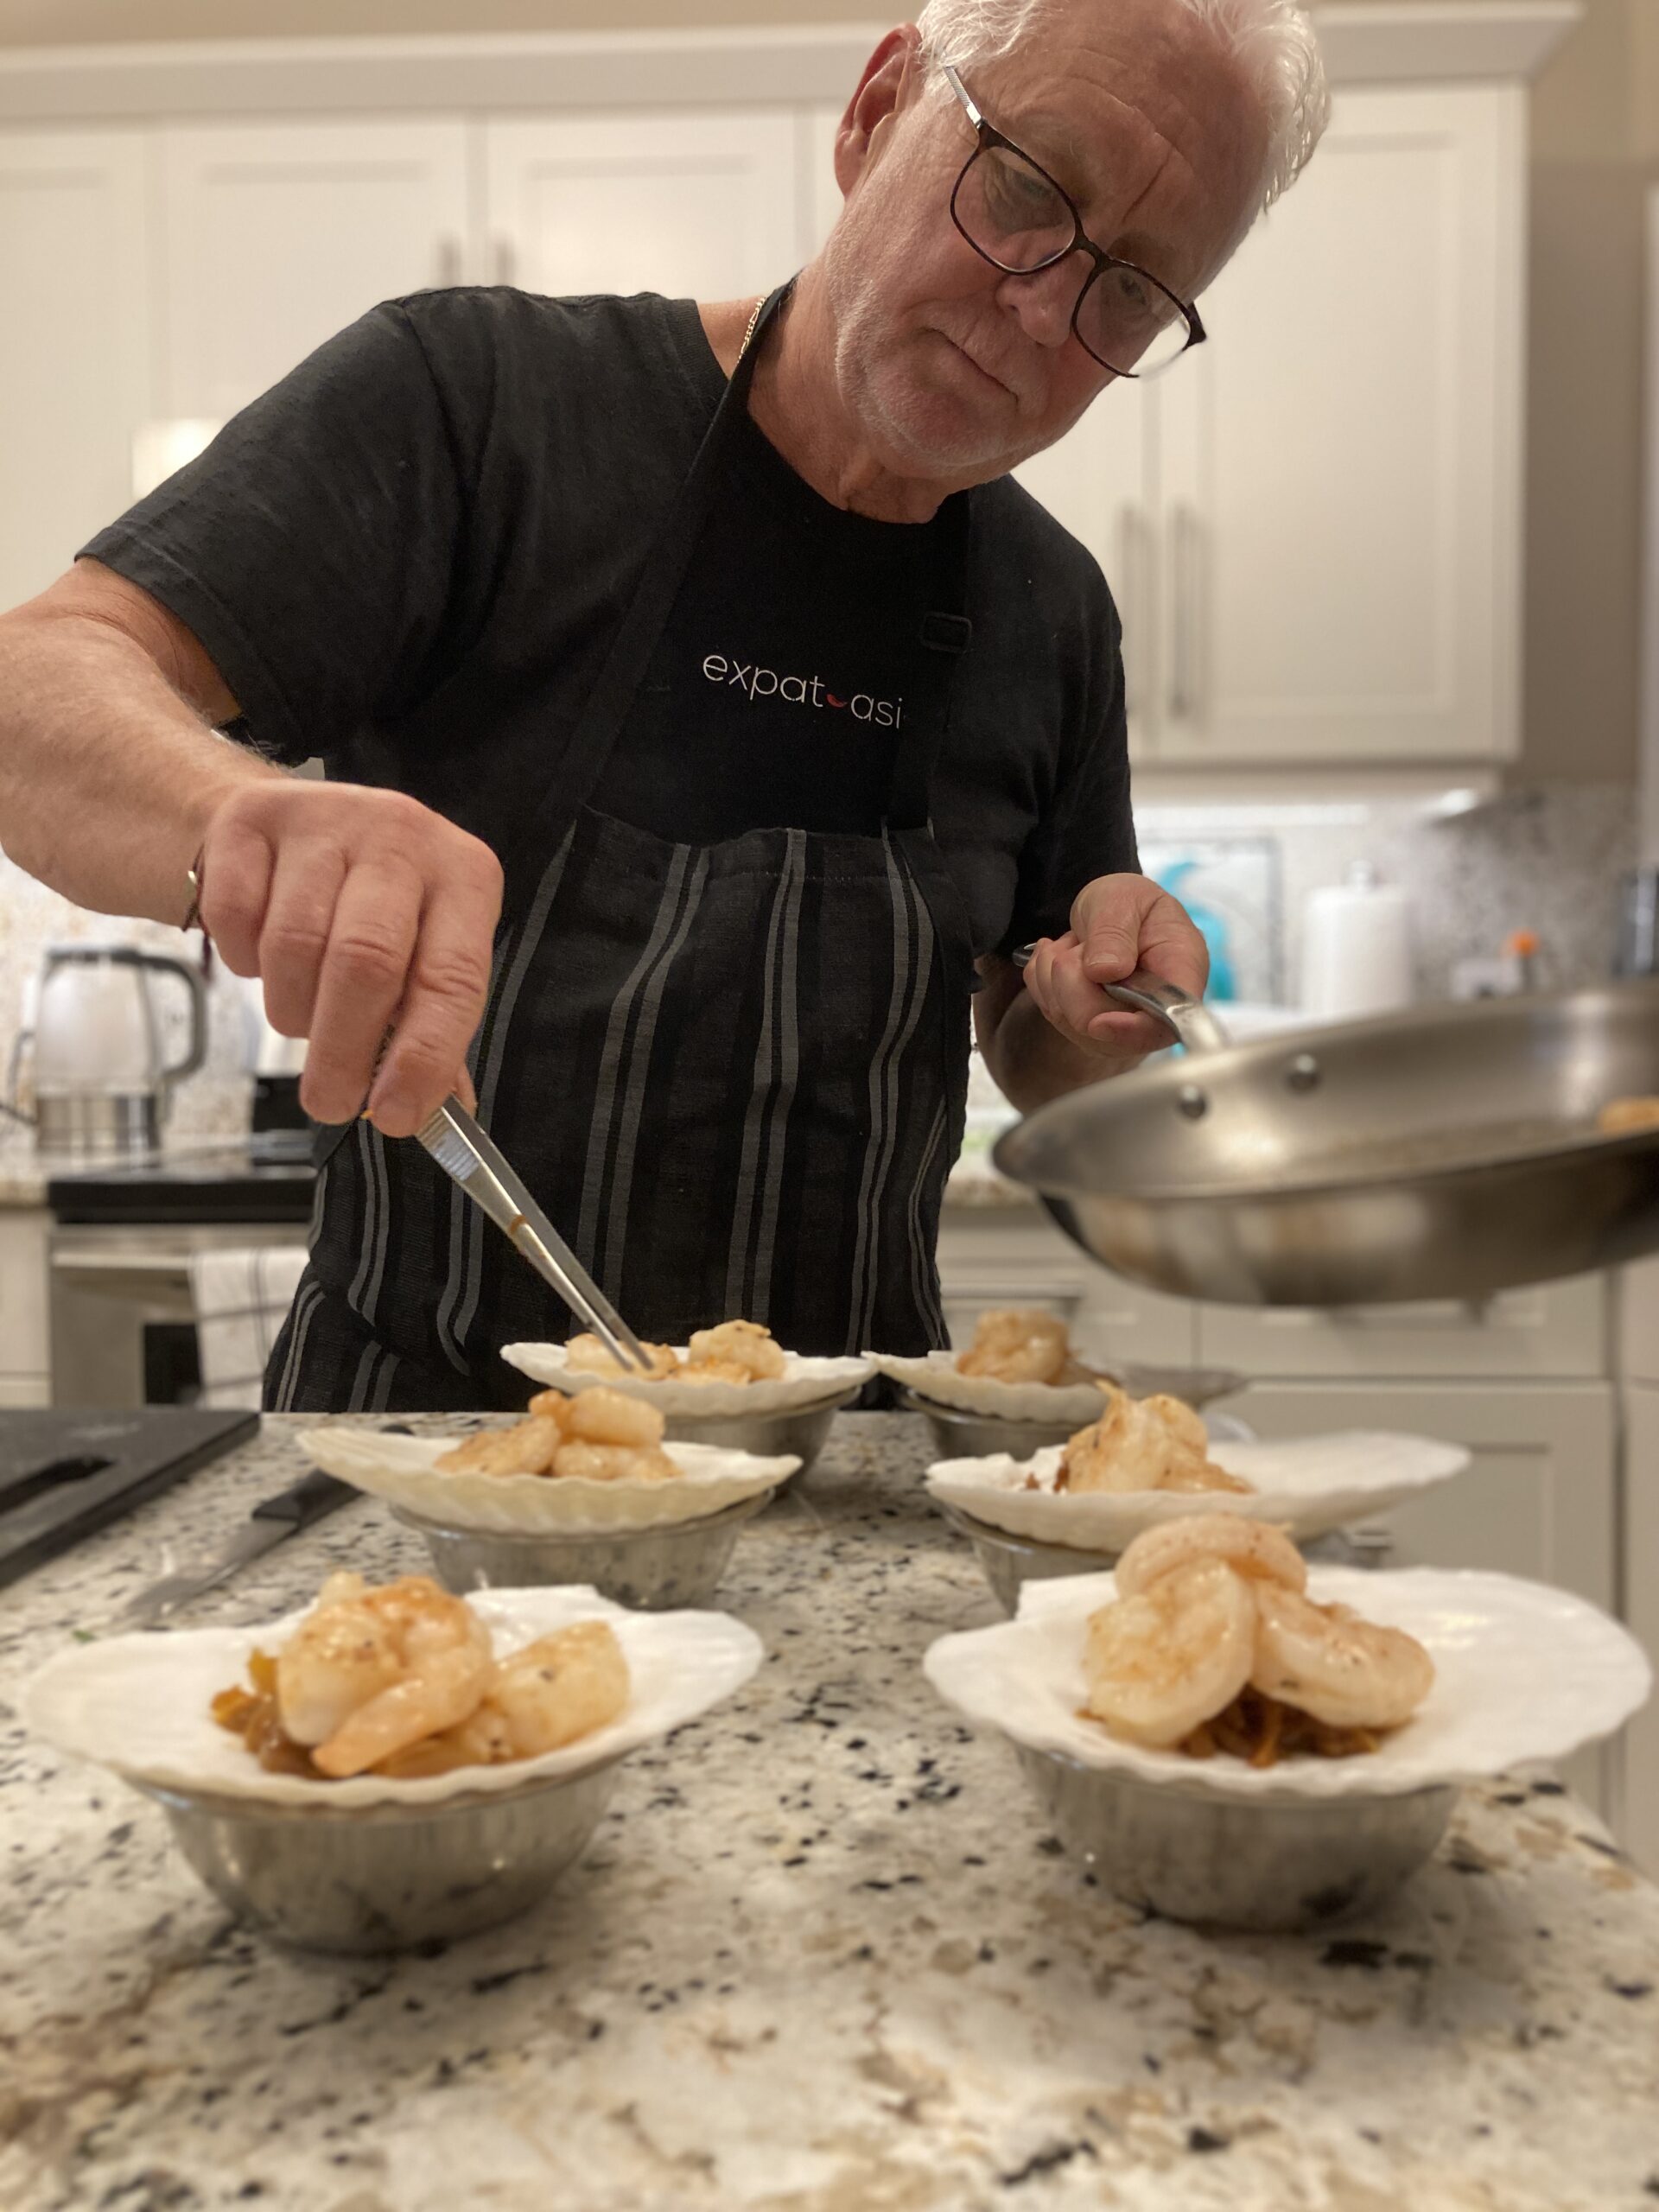 Jeff Matthews is one of the owners of Expat Asia - Catering Services in Calgary